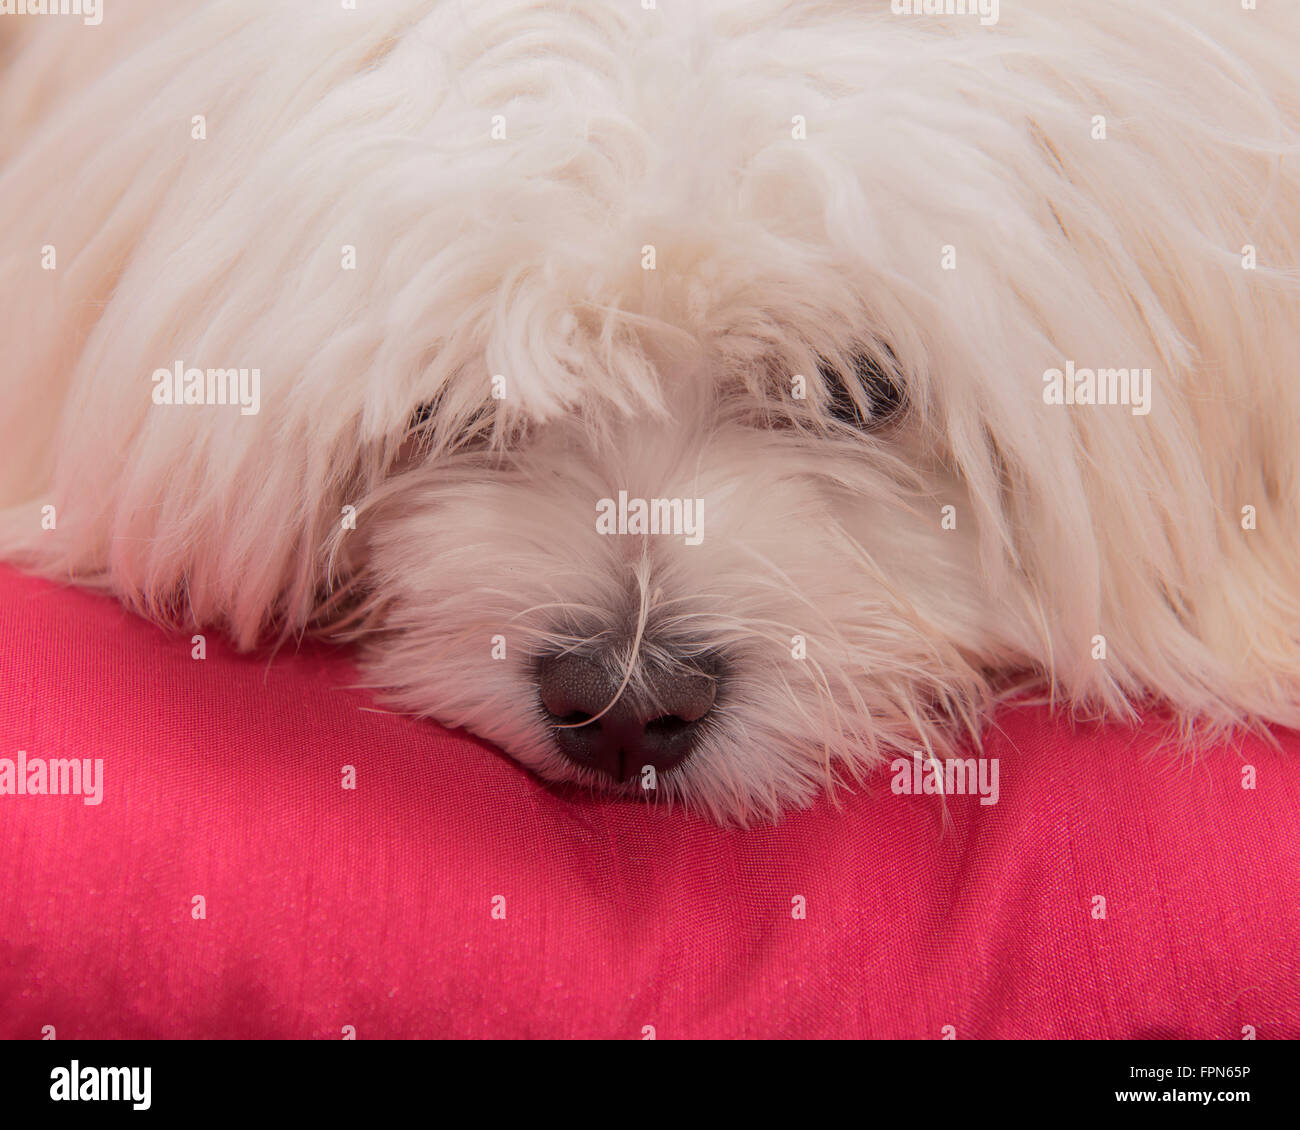 portrait of a young Pedigree Maltese dog looking fed up on a bright red cushion Stock Photo